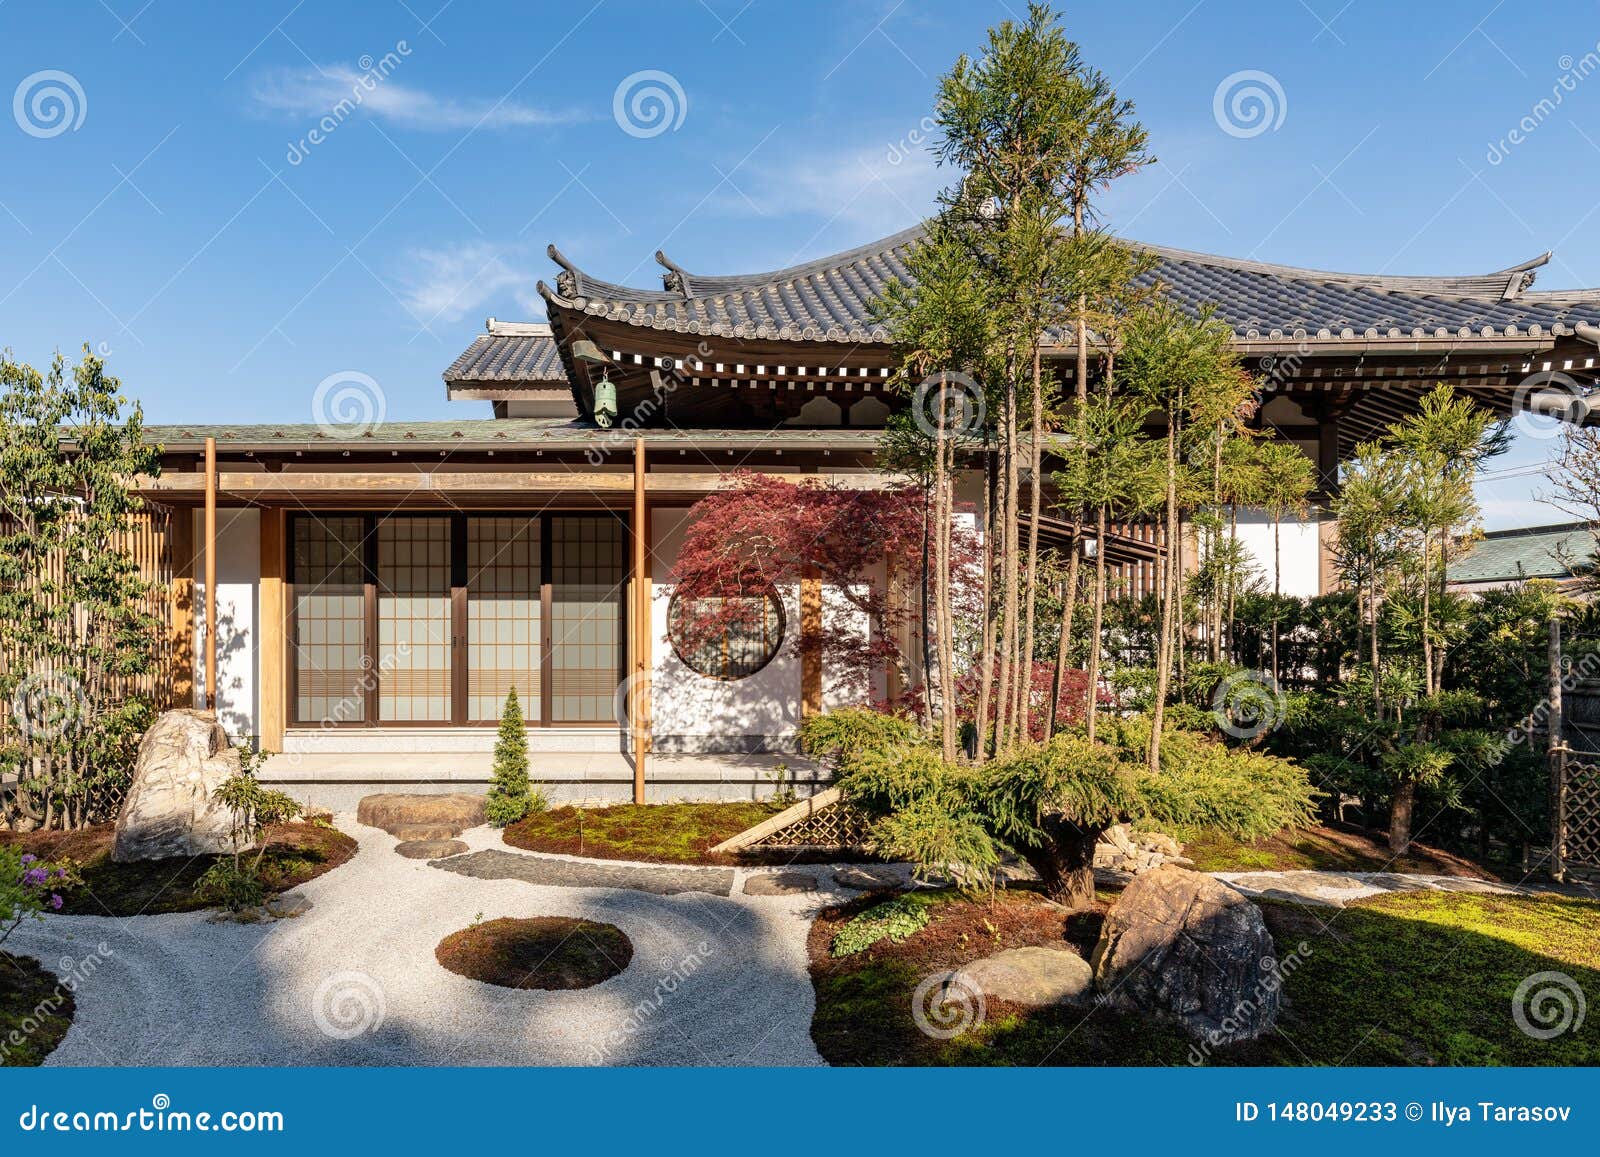 traditional japanese house with courtyard